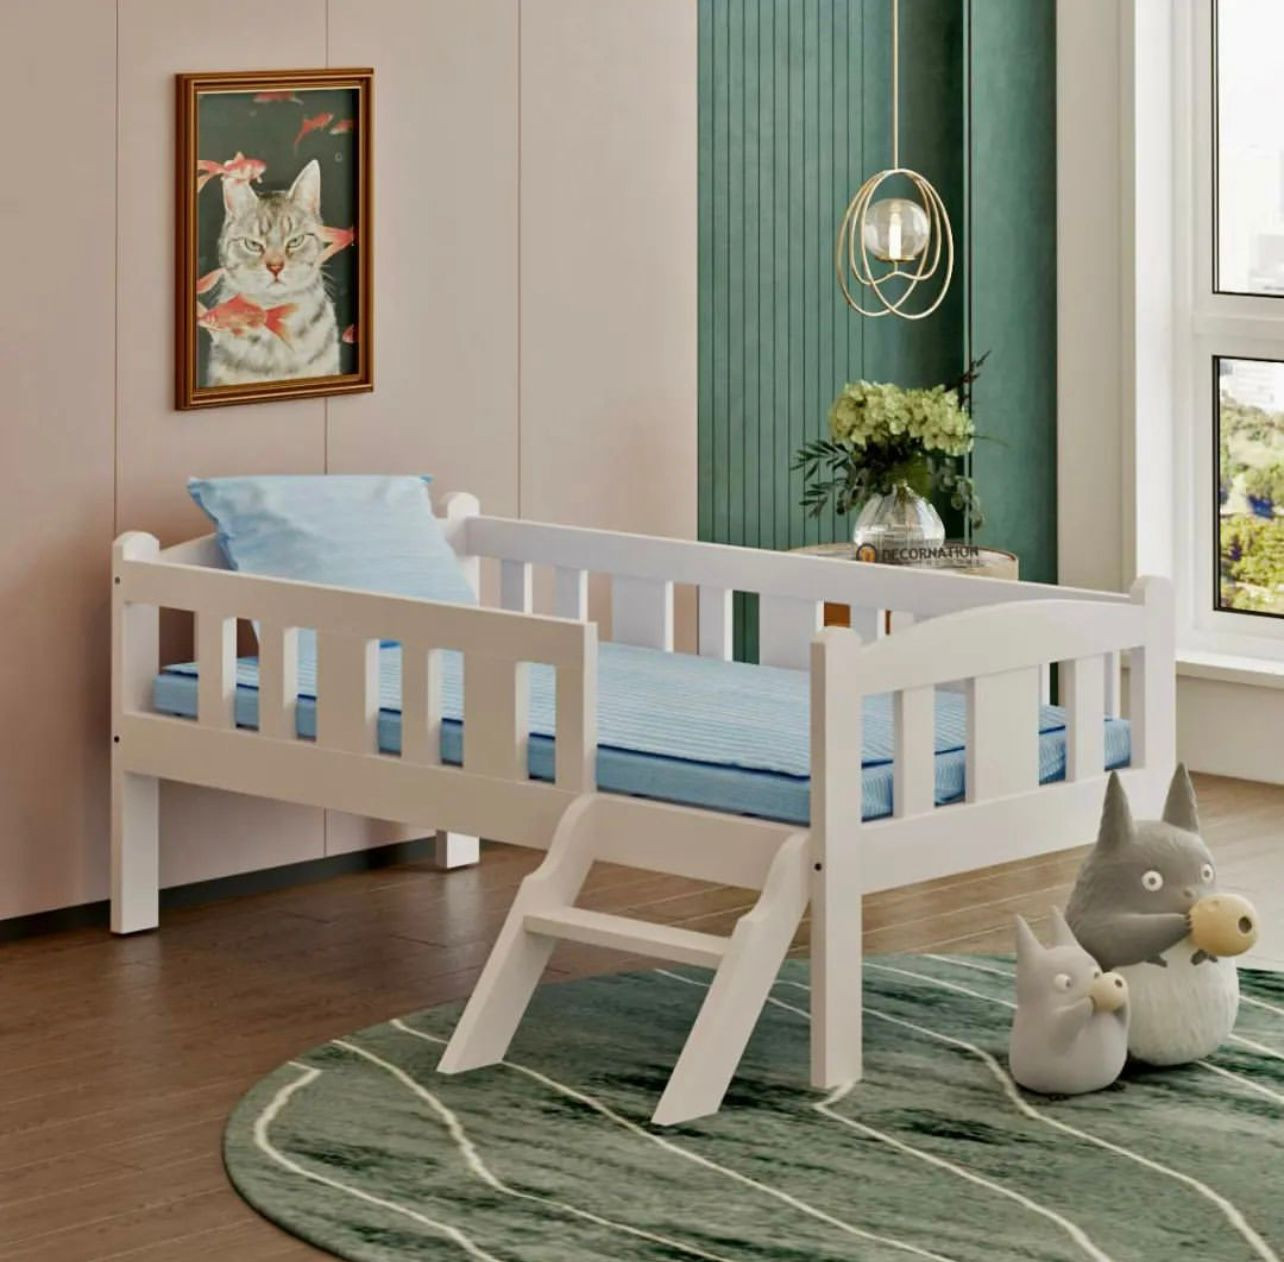 Wamaire Toddler Bed